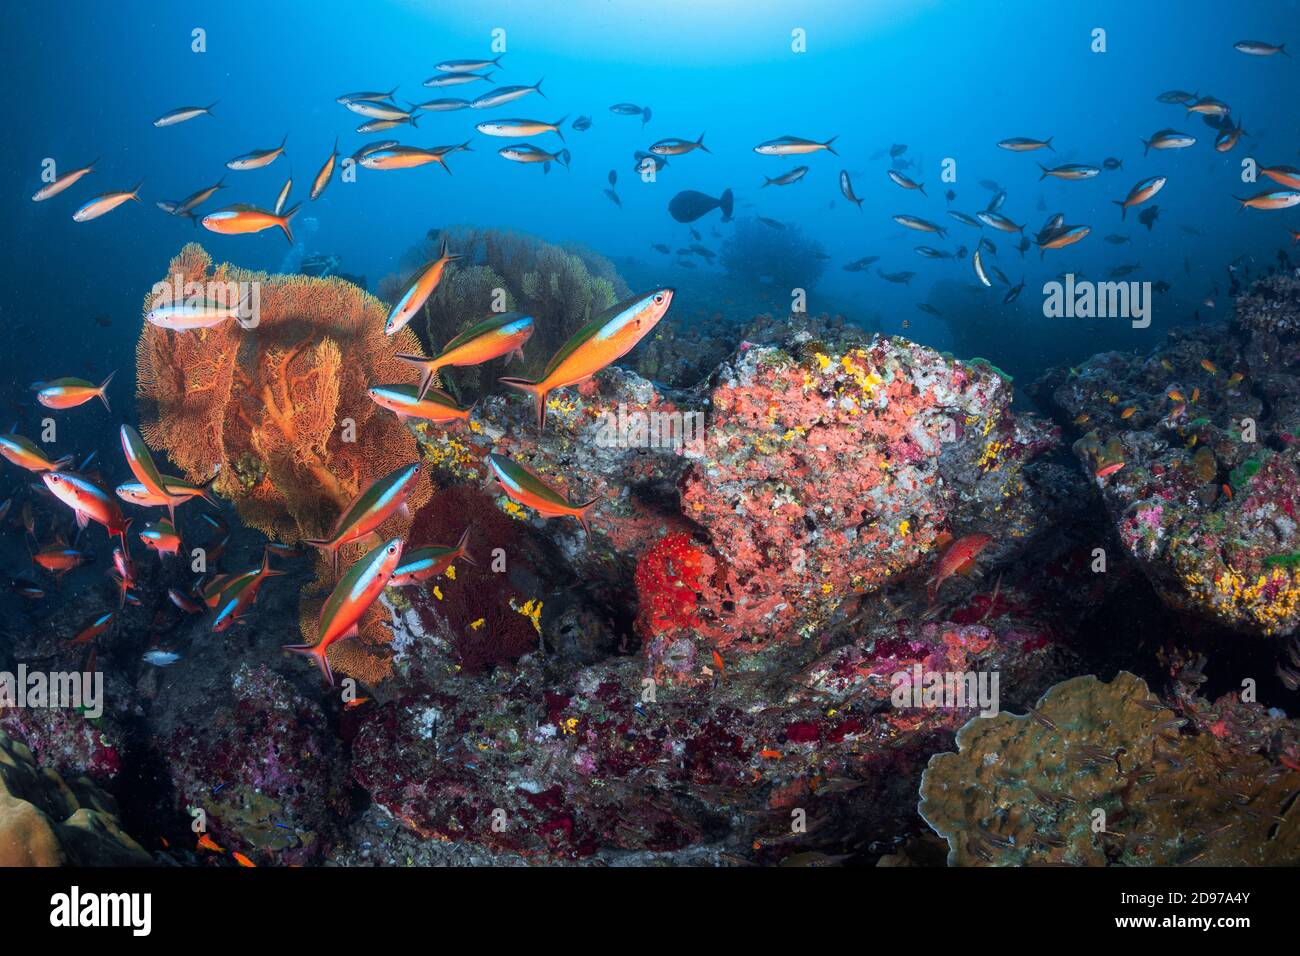 School of fusilier (Caesio sp) on one of the reefs of the Similan Islands, Thailand, Andaman Sea Stock Photo